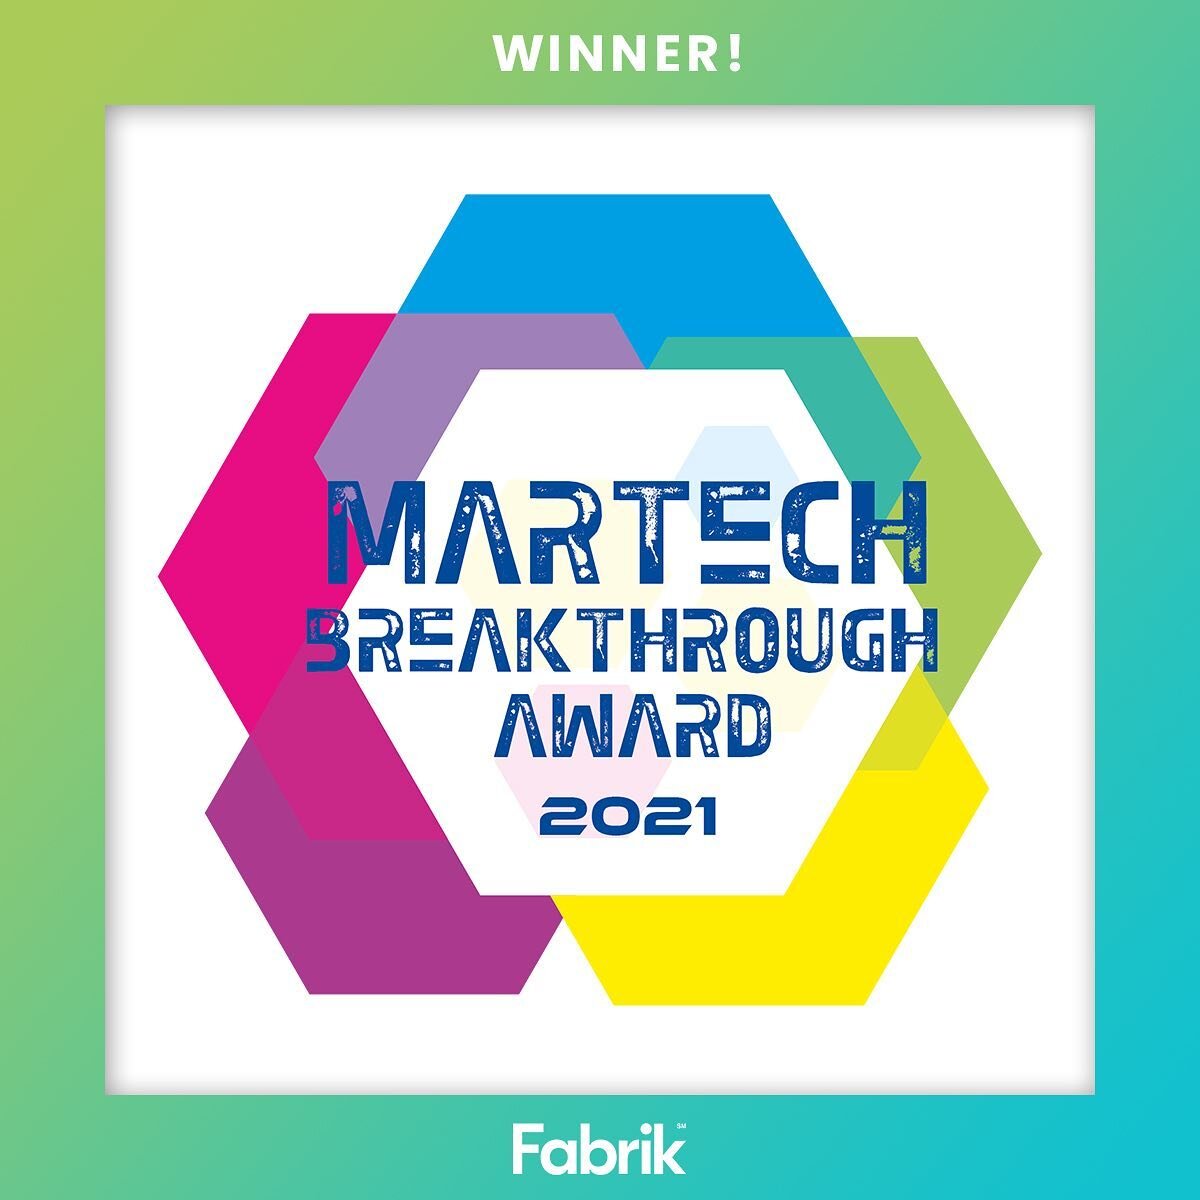 We did it again! The MarTech Breakthrough awards honor the best in ad tech innovation and Fabrik was named Best Overall Web Content Management Solution. Read the full release - link in bio.